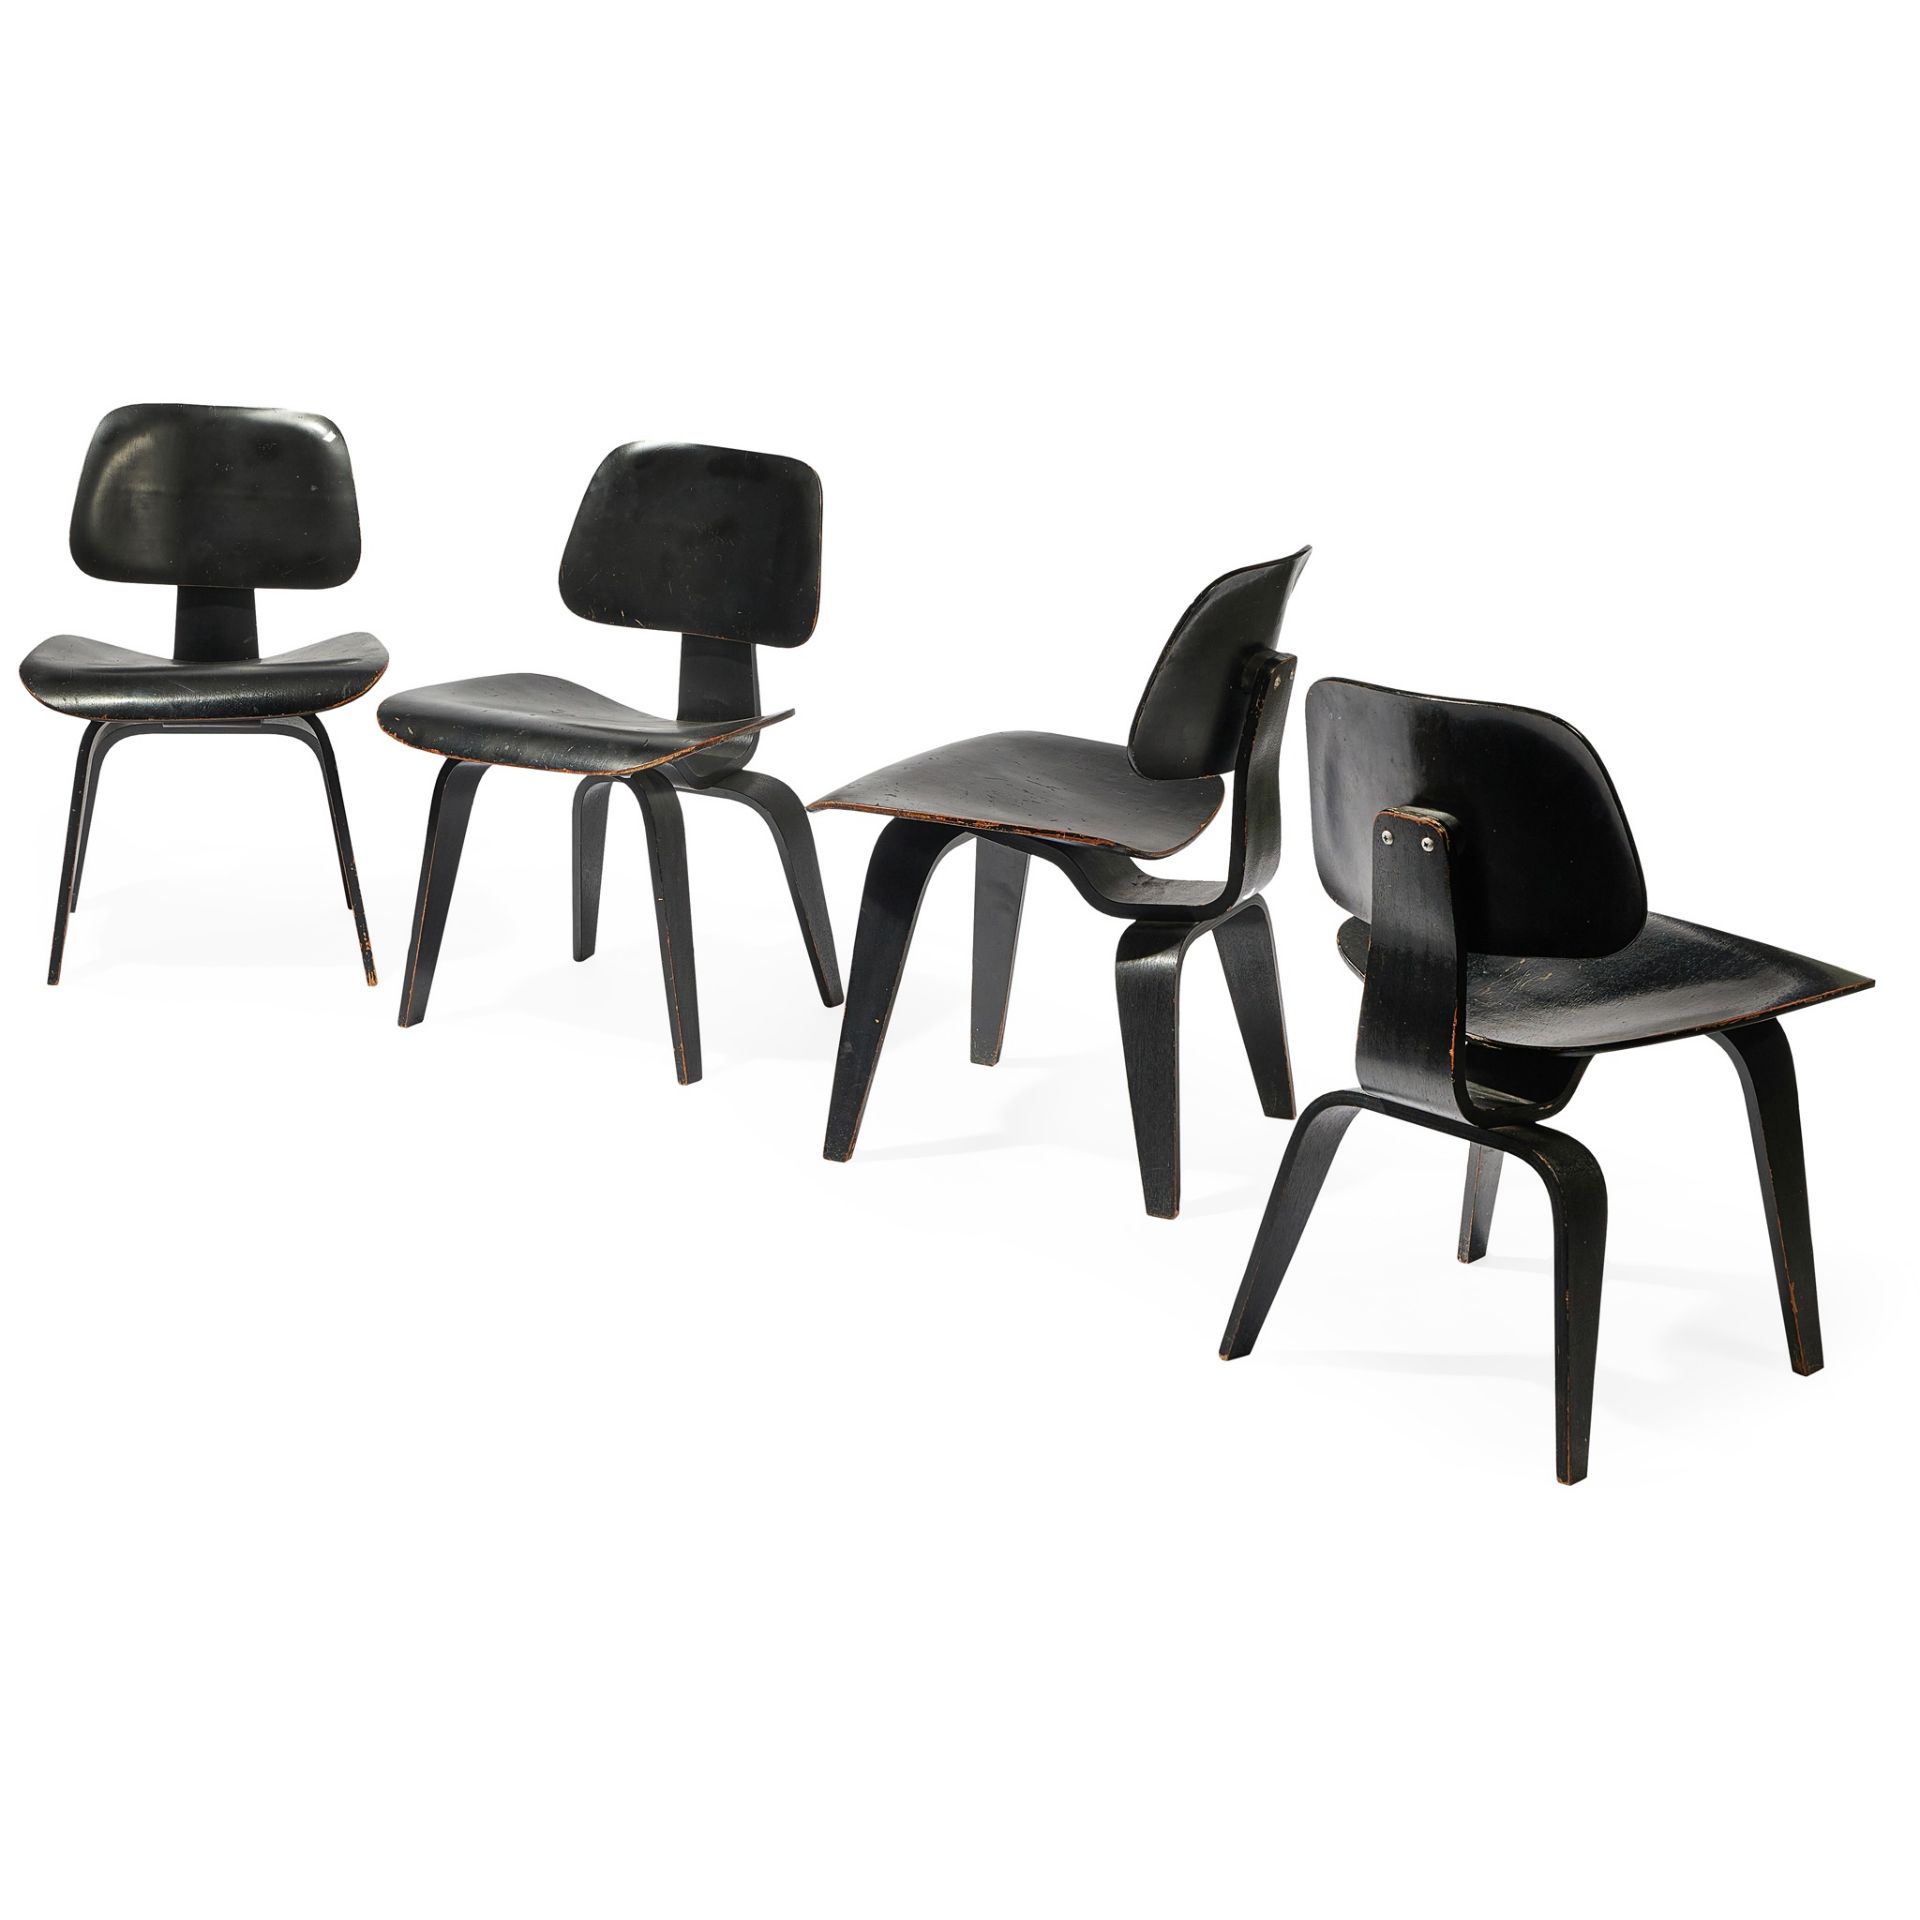 CHARLES AND RAY EAMES (AMERICAN, 1907-1978, 1912-1988) FOR EVANS SET OF FOUR DCW CHAIRS